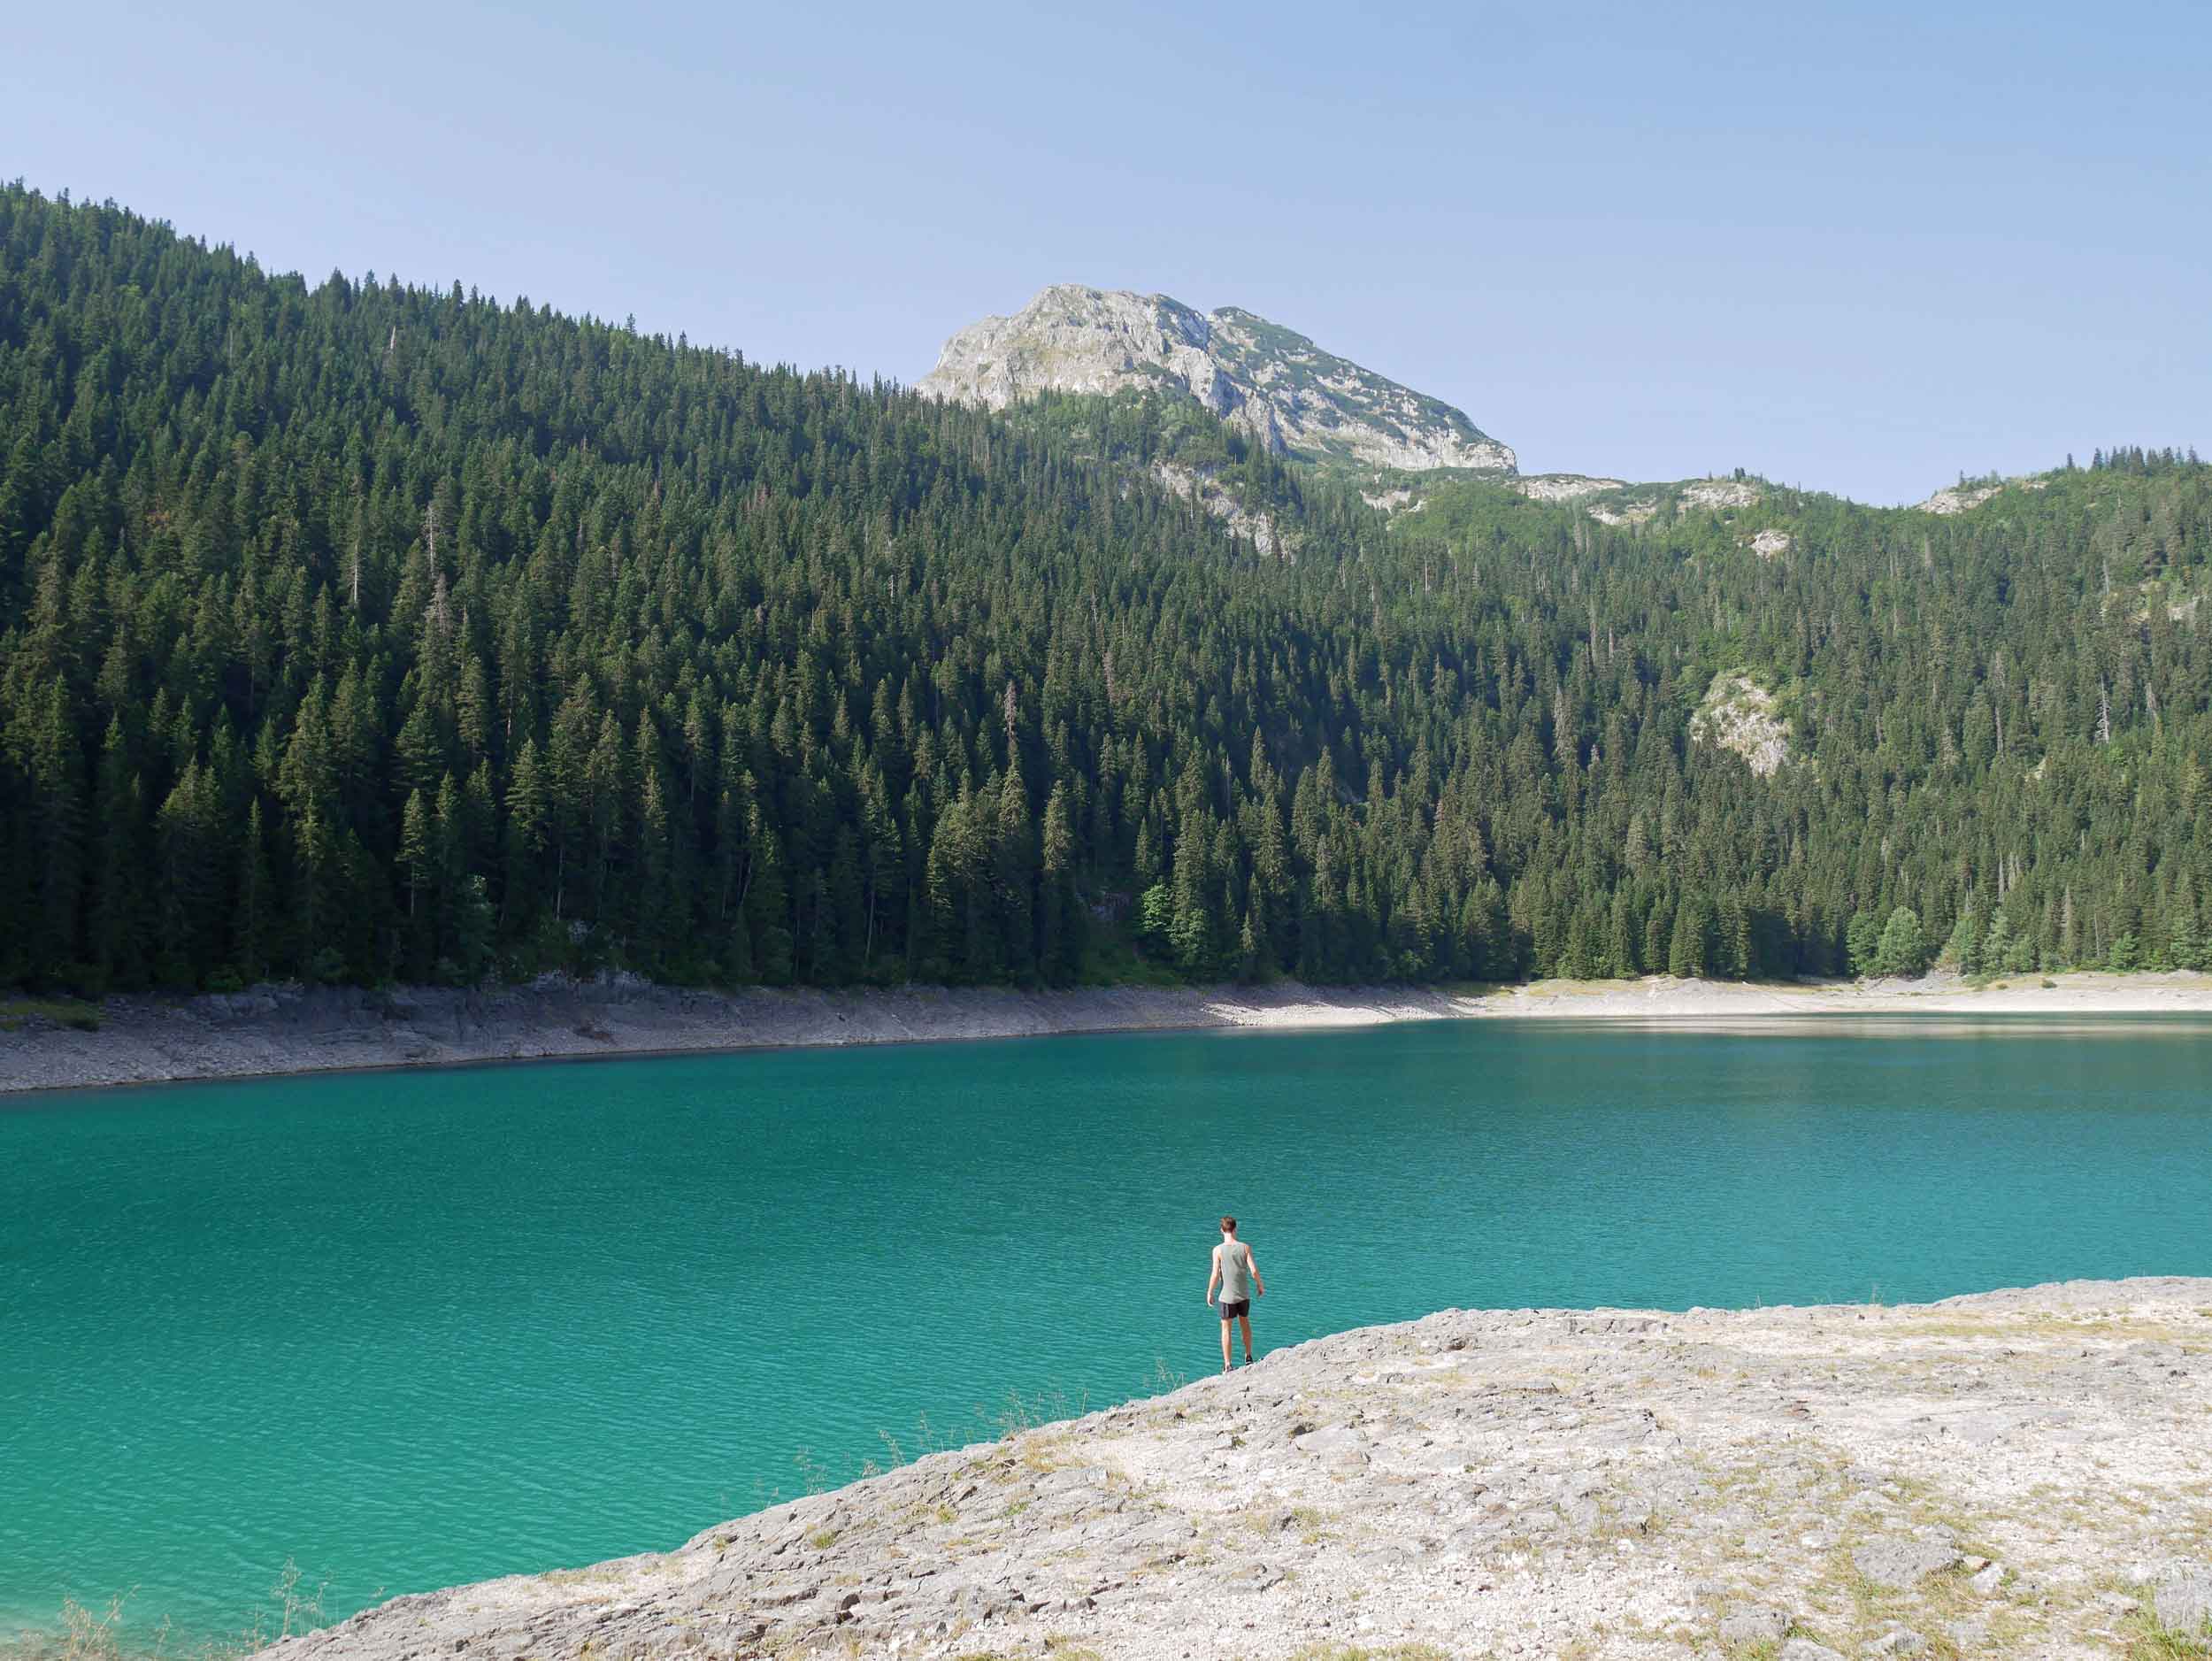  The calm waters of the Black Lake reflect the dark greens and blues of the evergreens and pines beyond.&nbsp; 